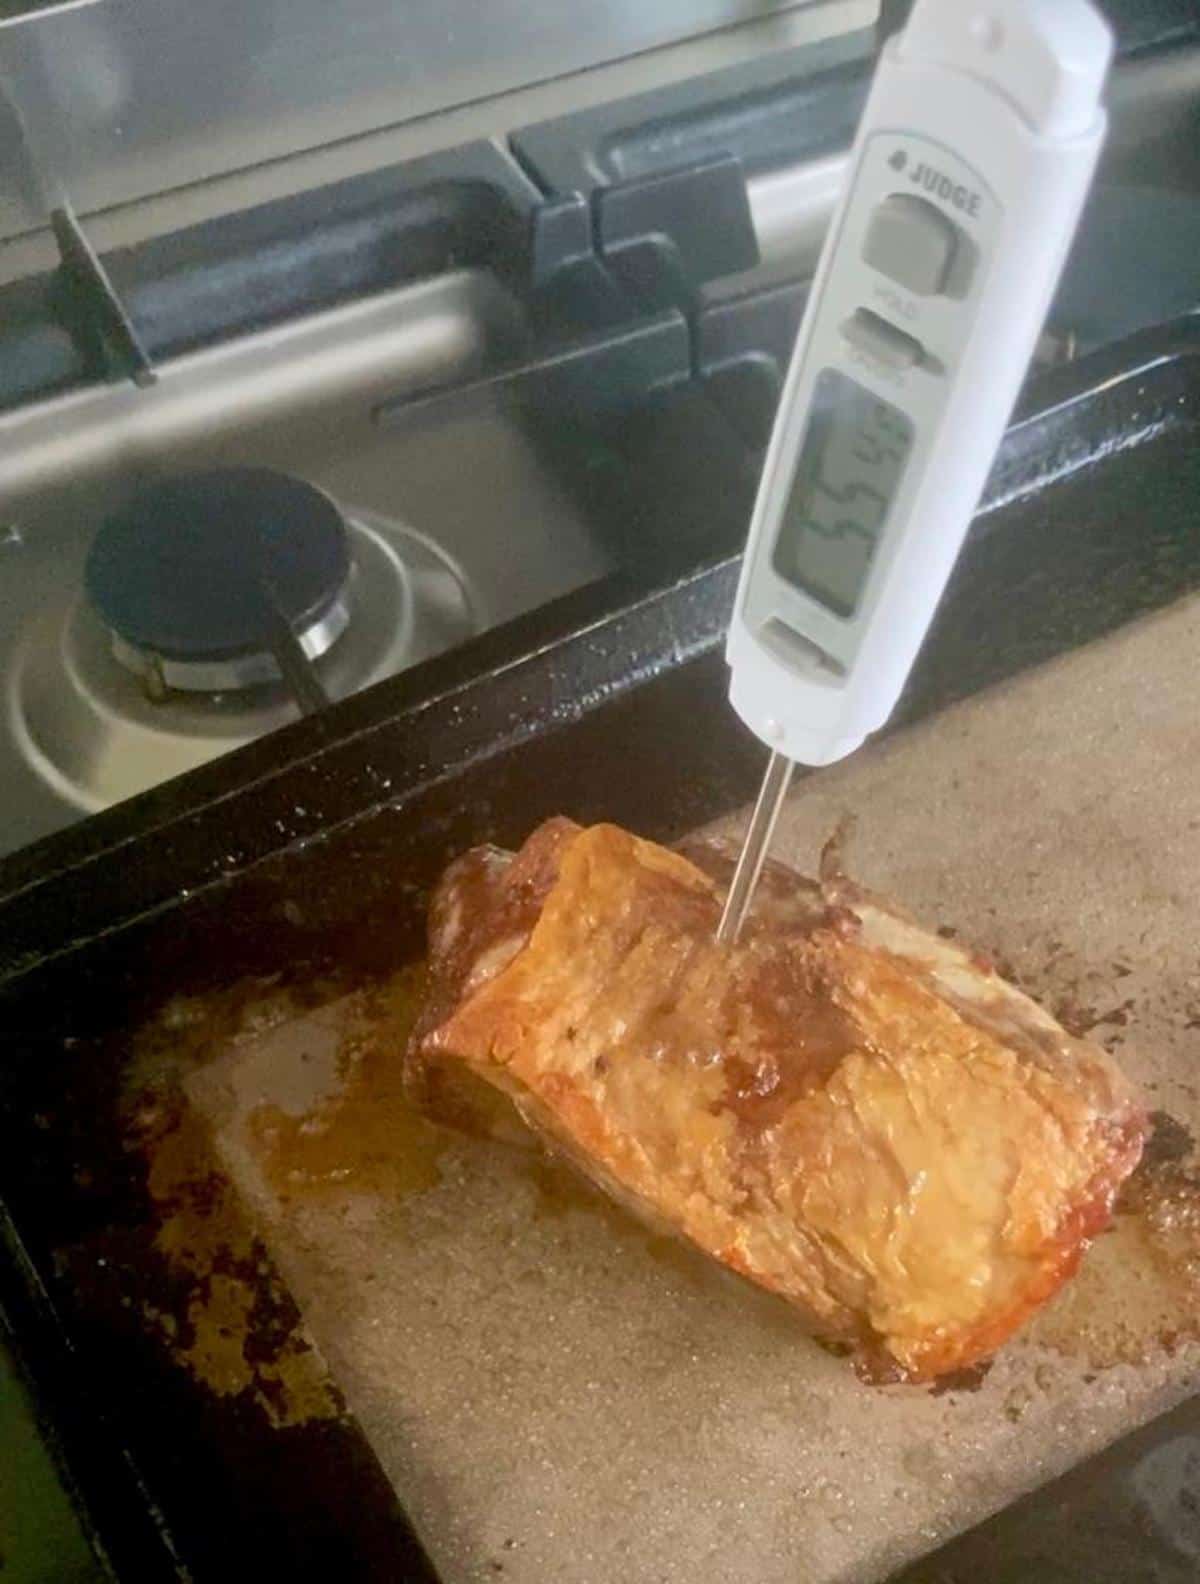 Measuring the temperature of the lamb rump with a meat thermometer